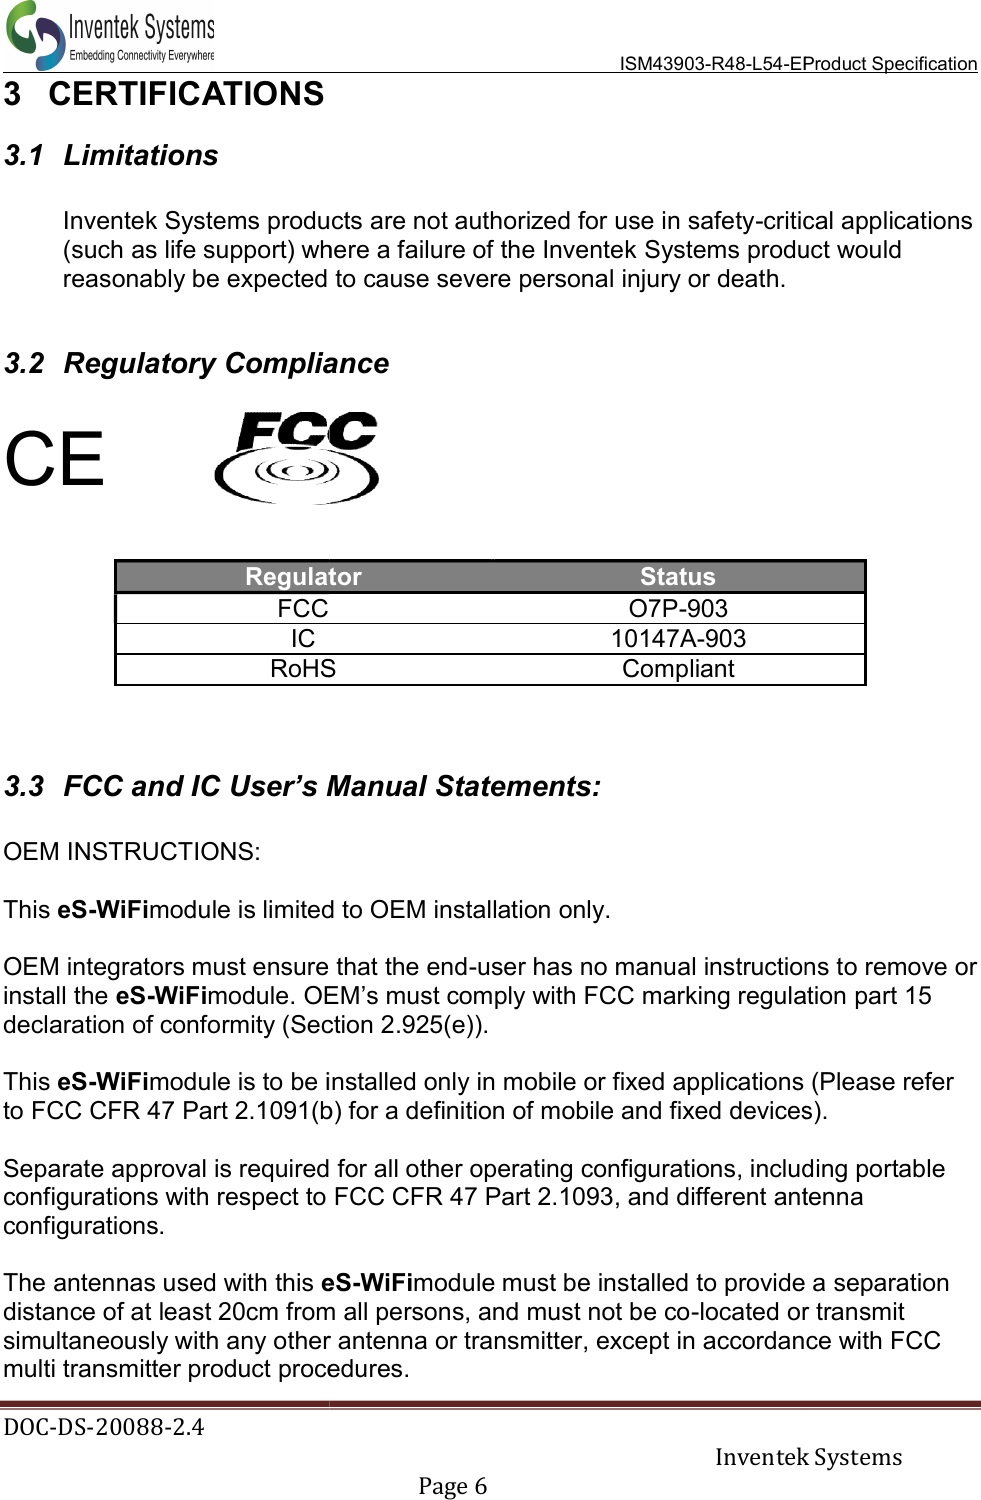  DOC-DS-20088-2.4   3  CERTIFICATIONS 3.1  Limitations  Inventek Systems products are not authorized for use in safety(such as life support) where a failure of the Inventek reasonably be expected to cause severe personal injury or death. 3.2 Regulatory Compliance CE   RegulatorFCC IC RoHS  3.3  FCC and IC User’s Manual Statements: OEM INSTRUCTIONS:  This eS-WiFimodule is limited to OEM installation only. OEM integrators must ensure that the endinstall the eS-WiFimodule. OEM’s must comply with FCC marking regulation part 15 declaration of conformity (Section 2.925(e)). This eS-WiFimodule is to be installed only in mobile or fixed applications (Please refer to FCC CFR 47 Part 2.1091(b) for a definition of mobile and fixed devices). Separate approval is required for all other operating configurations, including portable configurations with respect to FCC CFR 47 Part 2.1093, and different antenna configurations.   The antennas used with this eSdistance of at least 20cm from all persons, and must not be cosimultaneously with any other antenna or transmitter, except in accordance with FCC multi transmitter product procedures.  ISM43903-R48-L54-EProduct Specification  Inventek Systems Page 6  Inventek Systems products are not authorized for use in safety-critical applications (such as life support) where a failure of the Inventek Systems product would reasonably be expected to cause severe personal injury or death. Regulatory Compliance Regulator Status  O7P-903  10147A-903 RoHS  Compliant User’s Manual Statements: is limited to OEM installation only. OEM integrators must ensure that the end-user has no manual instructions tOEM’s must comply with FCC marking regulation part 15 declaration of conformity (Section 2.925(e)). module is to be installed only in mobile or fixed applications (Please refer to FCC CFR 47 Part 2.1091(b) for a definition of mobile and fixed devices).Separate approval is required for all other operating configurations, including portable igurations with respect to FCC CFR 47 Part 2.1093, and different antenna eS-WiFimodule must be installed to provide a separation distance of at least 20cm from all persons, and must not be co-located or transmisimultaneously with any other antenna or transmitter, except in accordance with FCC multi transmitter product procedures.  Product Specification Inventek Systems critical applications Systems product would user has no manual instructions to remove or OEM’s must comply with FCC marking regulation part 15 module is to be installed only in mobile or fixed applications (Please refer to FCC CFR 47 Part 2.1091(b) for a definition of mobile and fixed devices). Separate approval is required for all other operating configurations, including portable igurations with respect to FCC CFR 47 Part 2.1093, and different antenna module must be installed to provide a separation located or transmit simultaneously with any other antenna or transmitter, except in accordance with FCC 